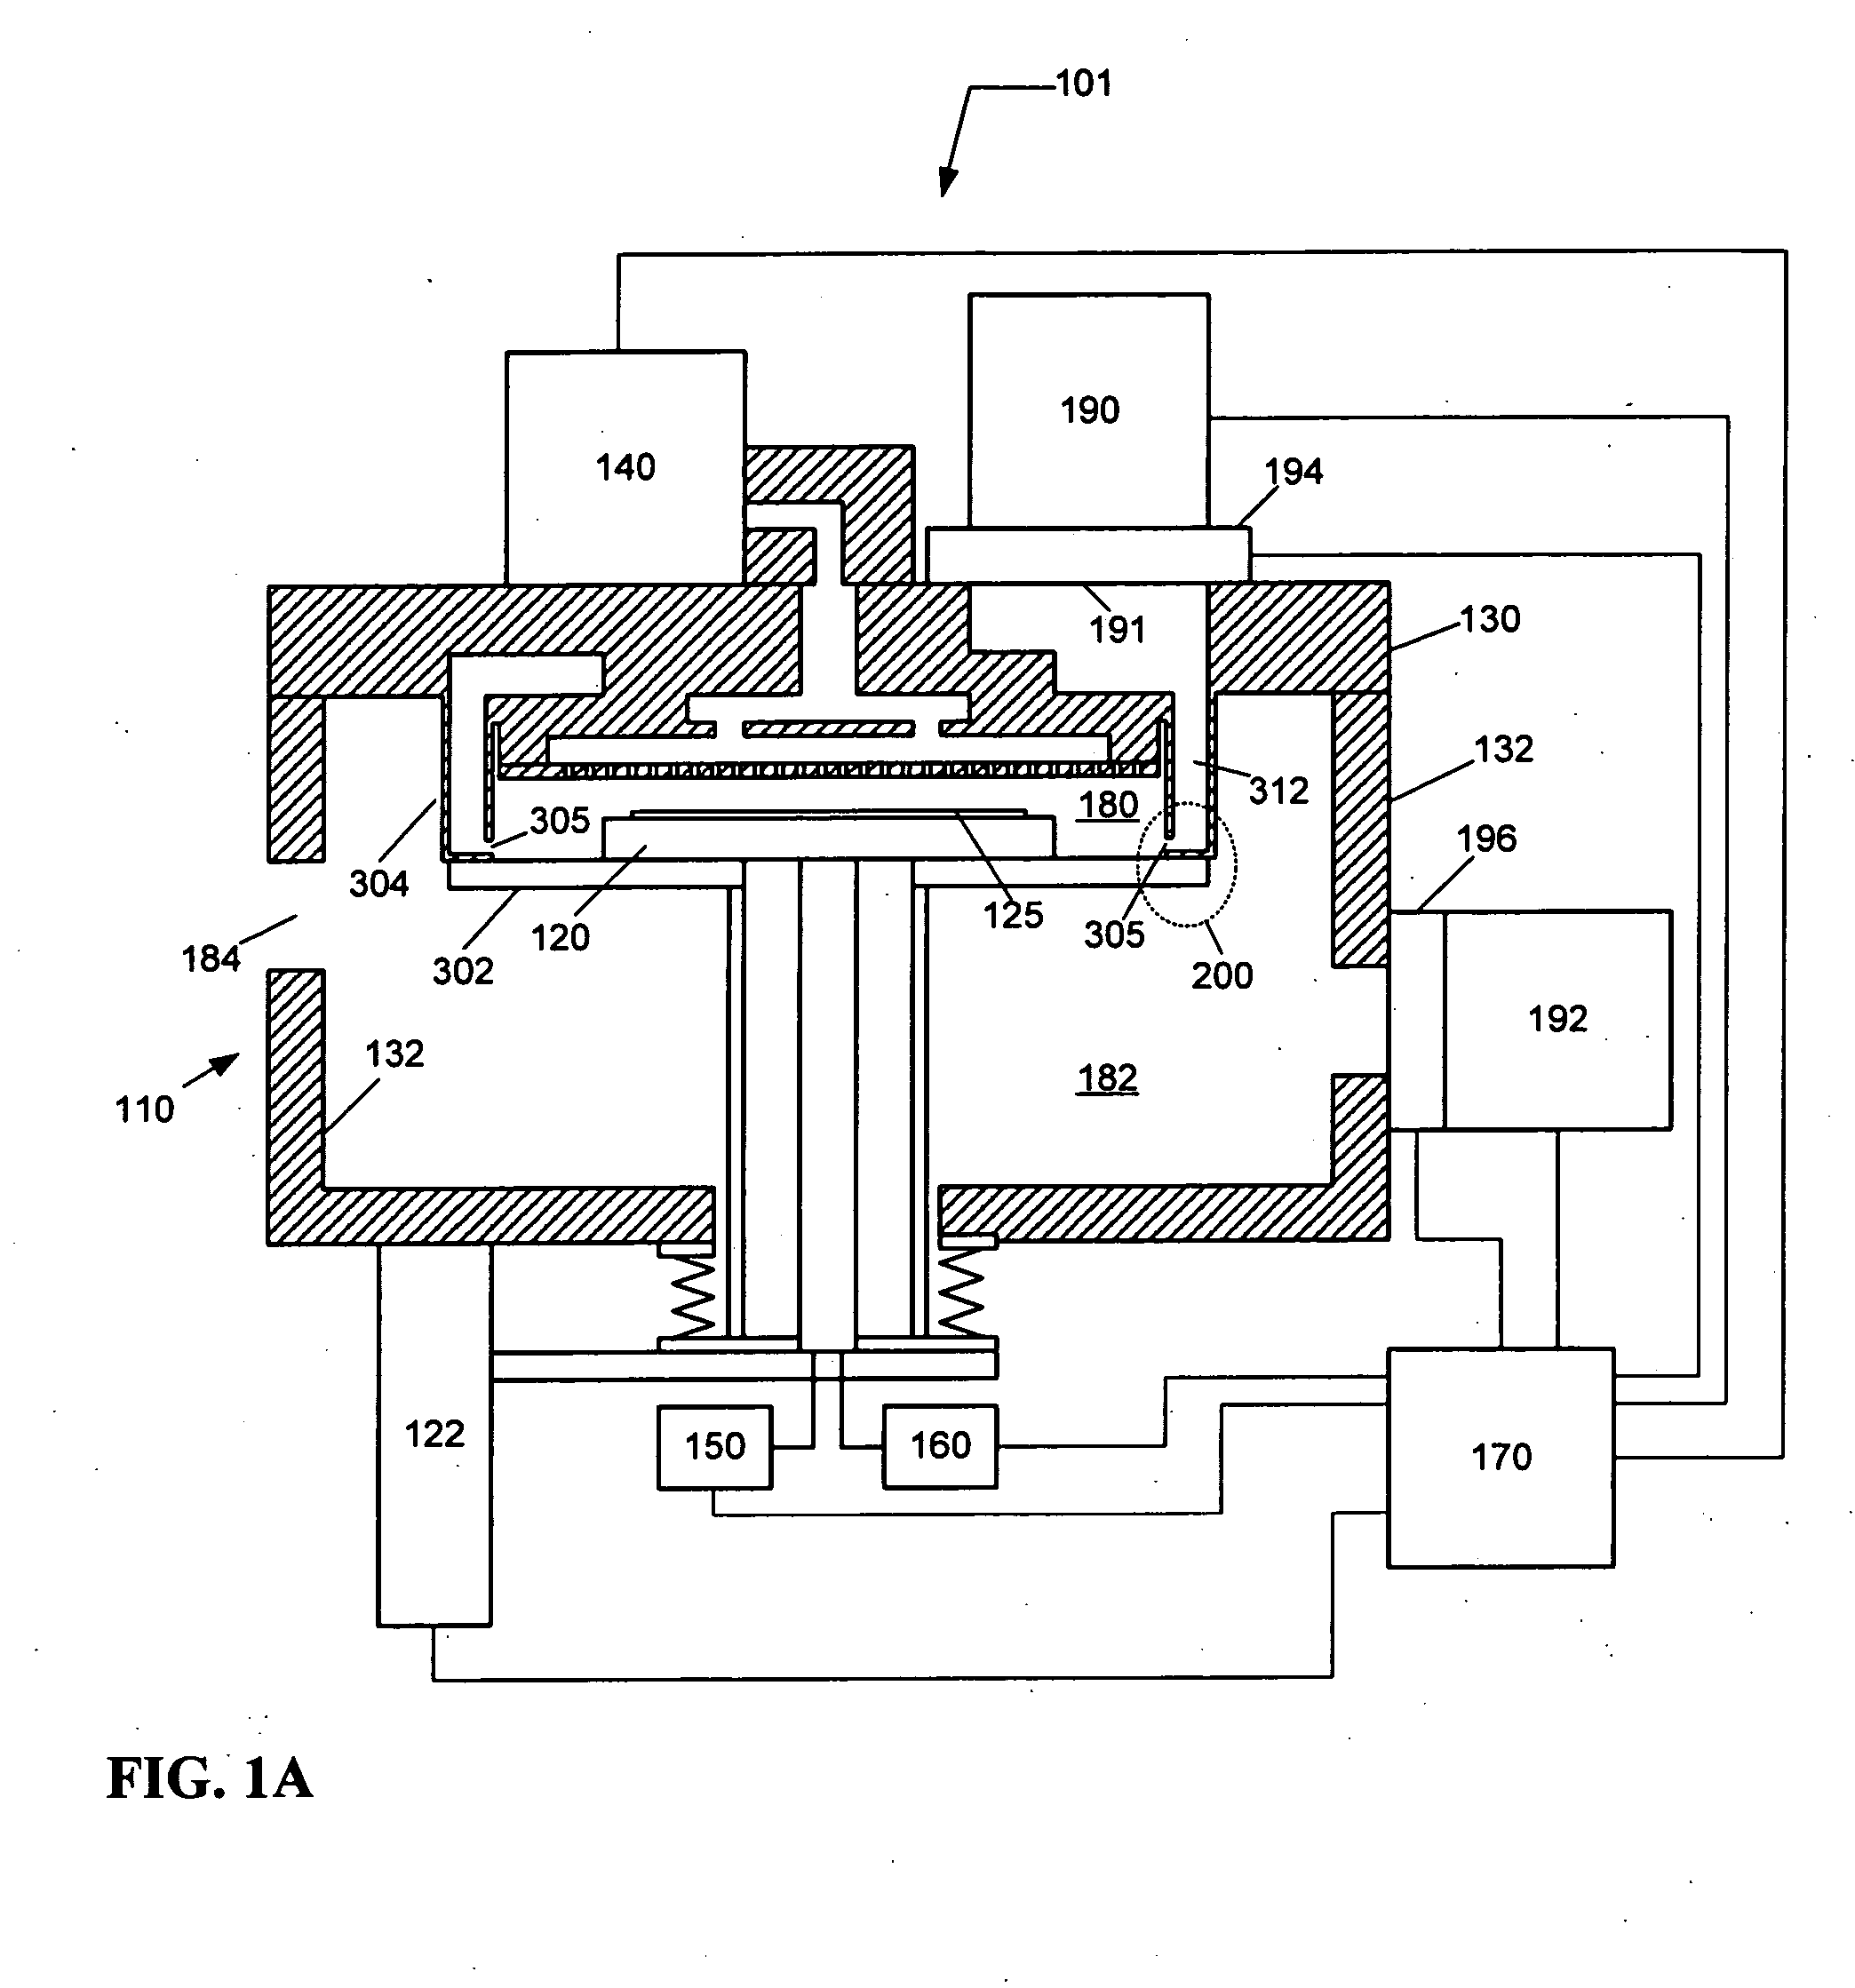 Sealing device and method for a processing system